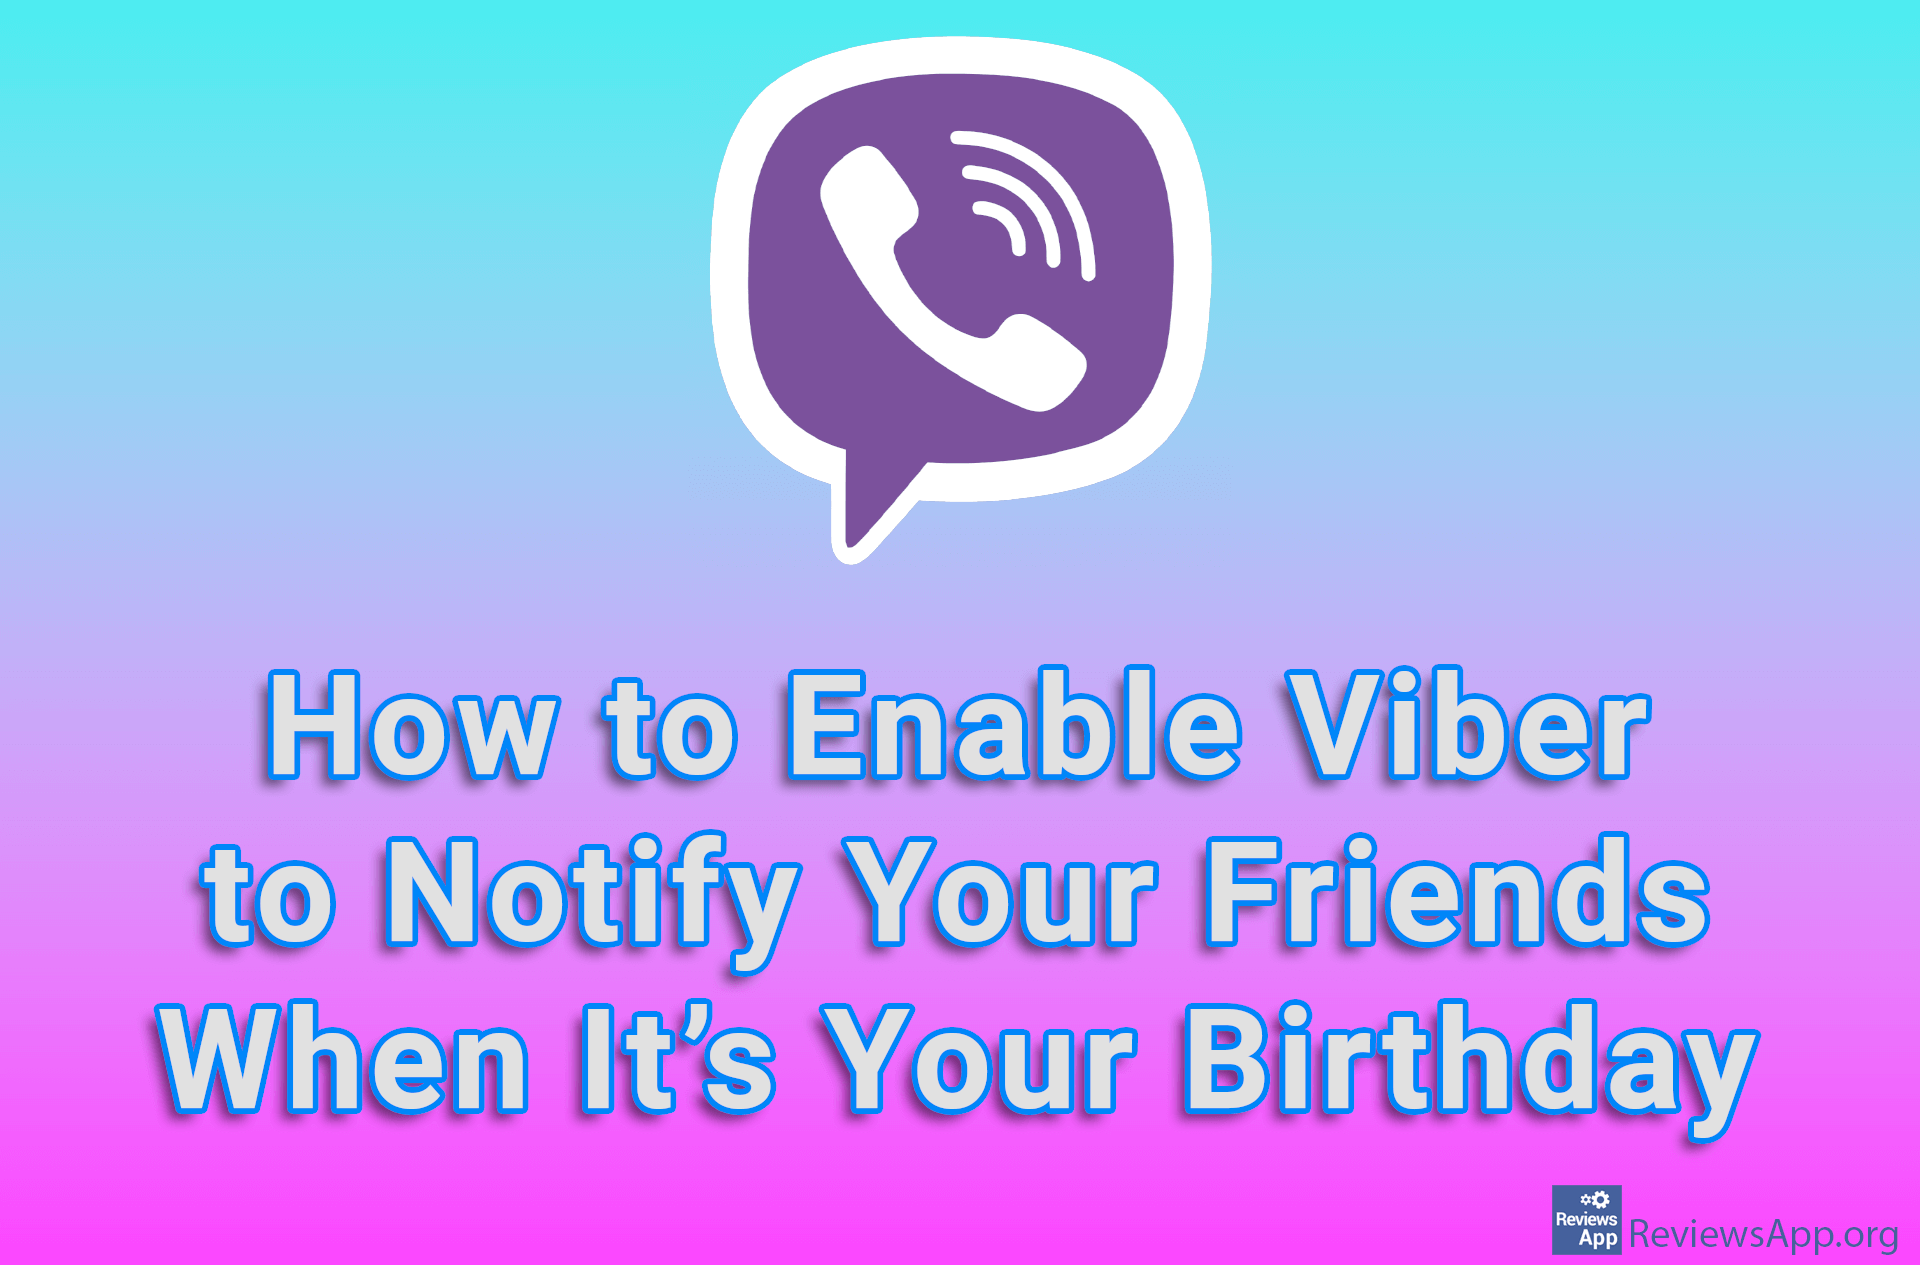 How to Enable Viber to Notify Your Friends When It’s Your Birthday